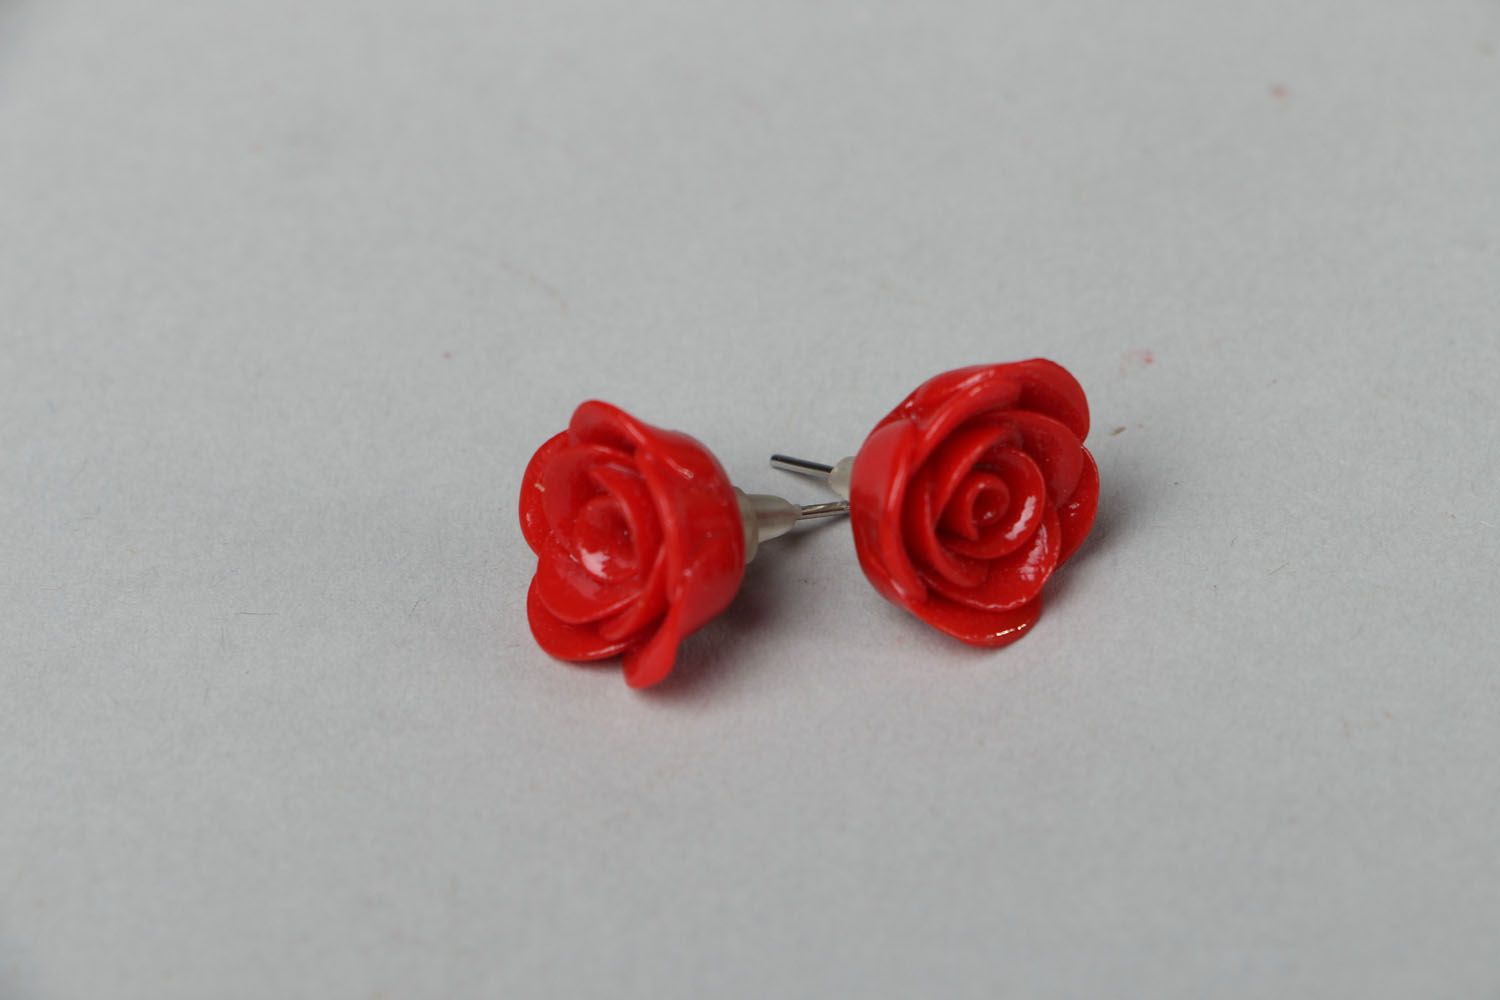 Stud earrings in the shape of red roses photo 1